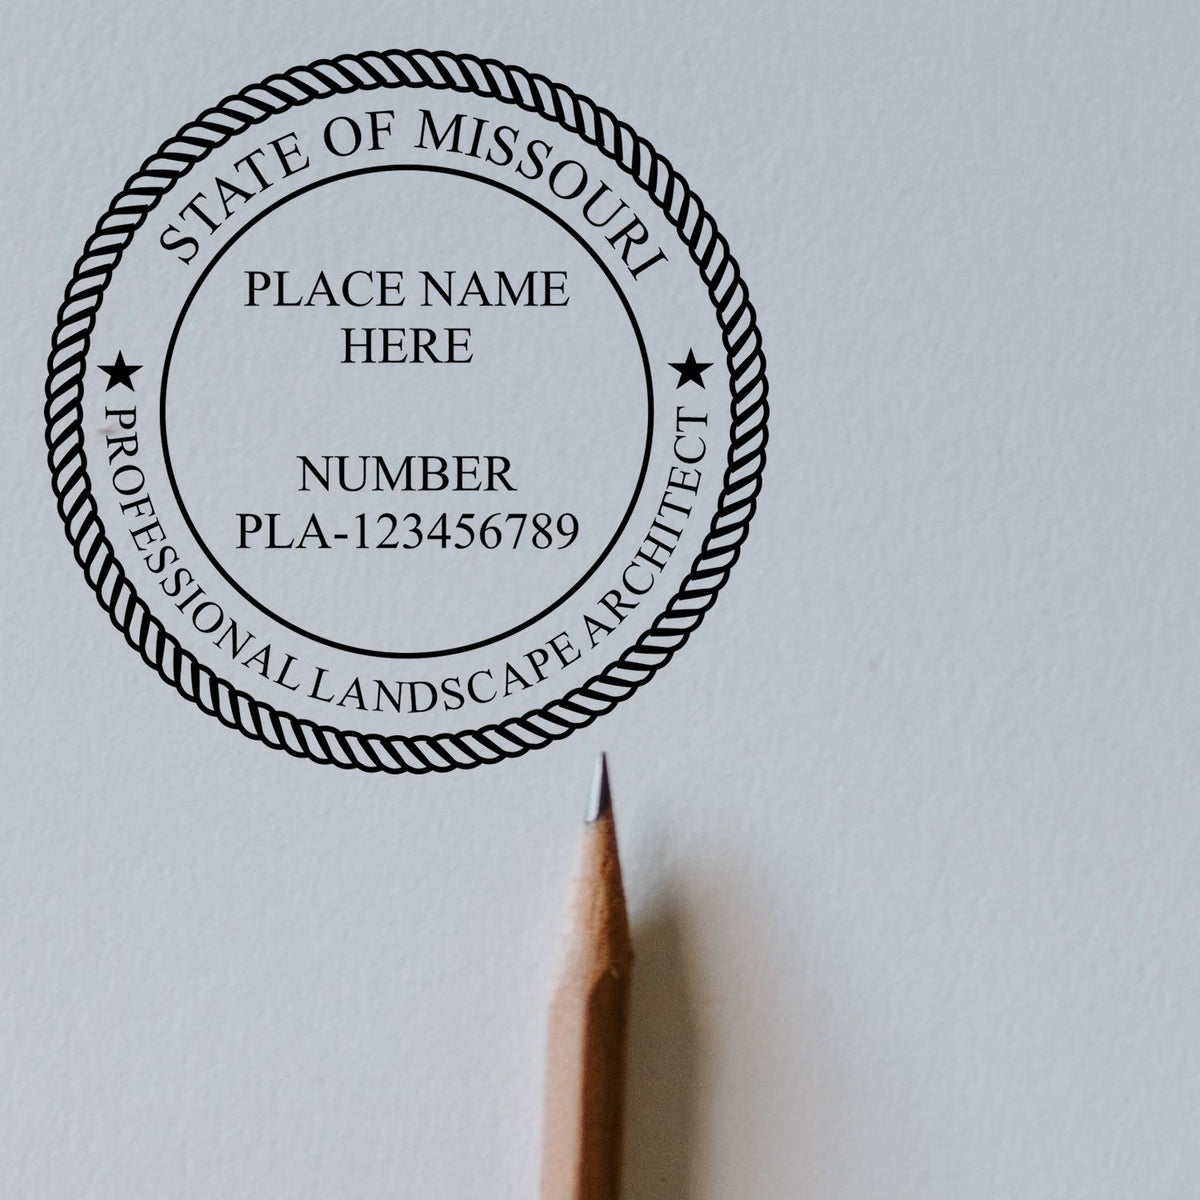 This paper is stamped with a sample imprint of the Premium MaxLight Pre-Inked Missouri Landscape Architectural Stamp, signifying its quality and reliability.